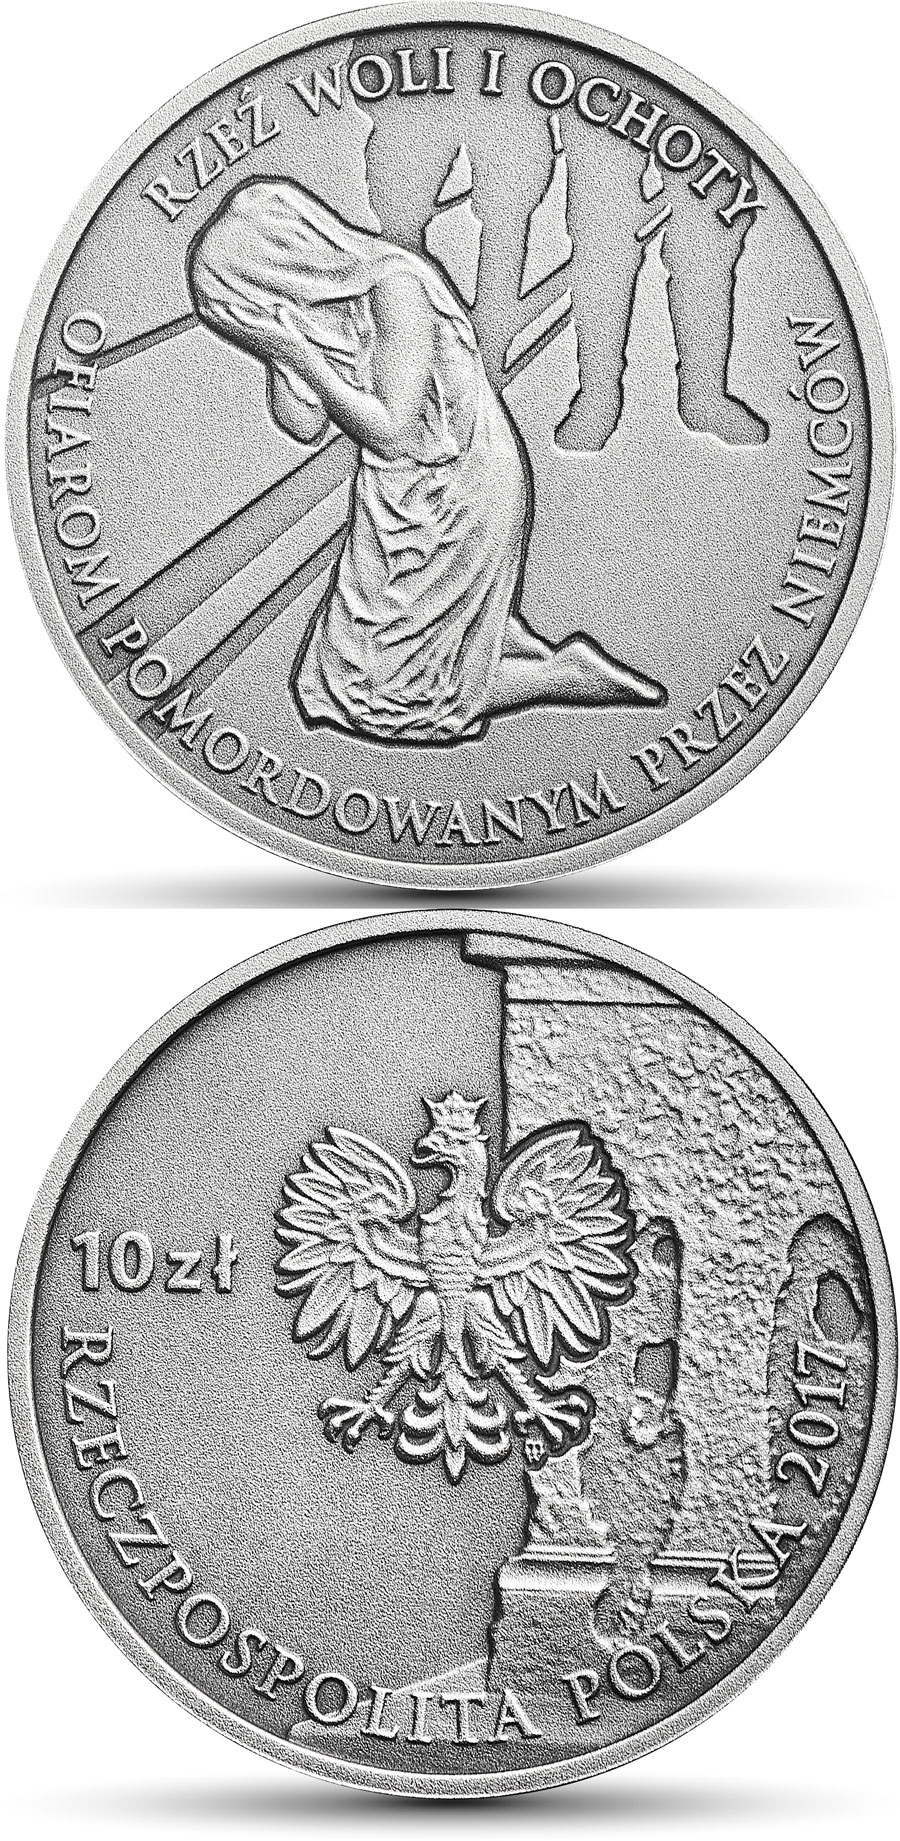 Image of 10 zloty coin - The Wola and Ochota Massacres  | Poland 2017.  The Silver coin is of Proof quality.